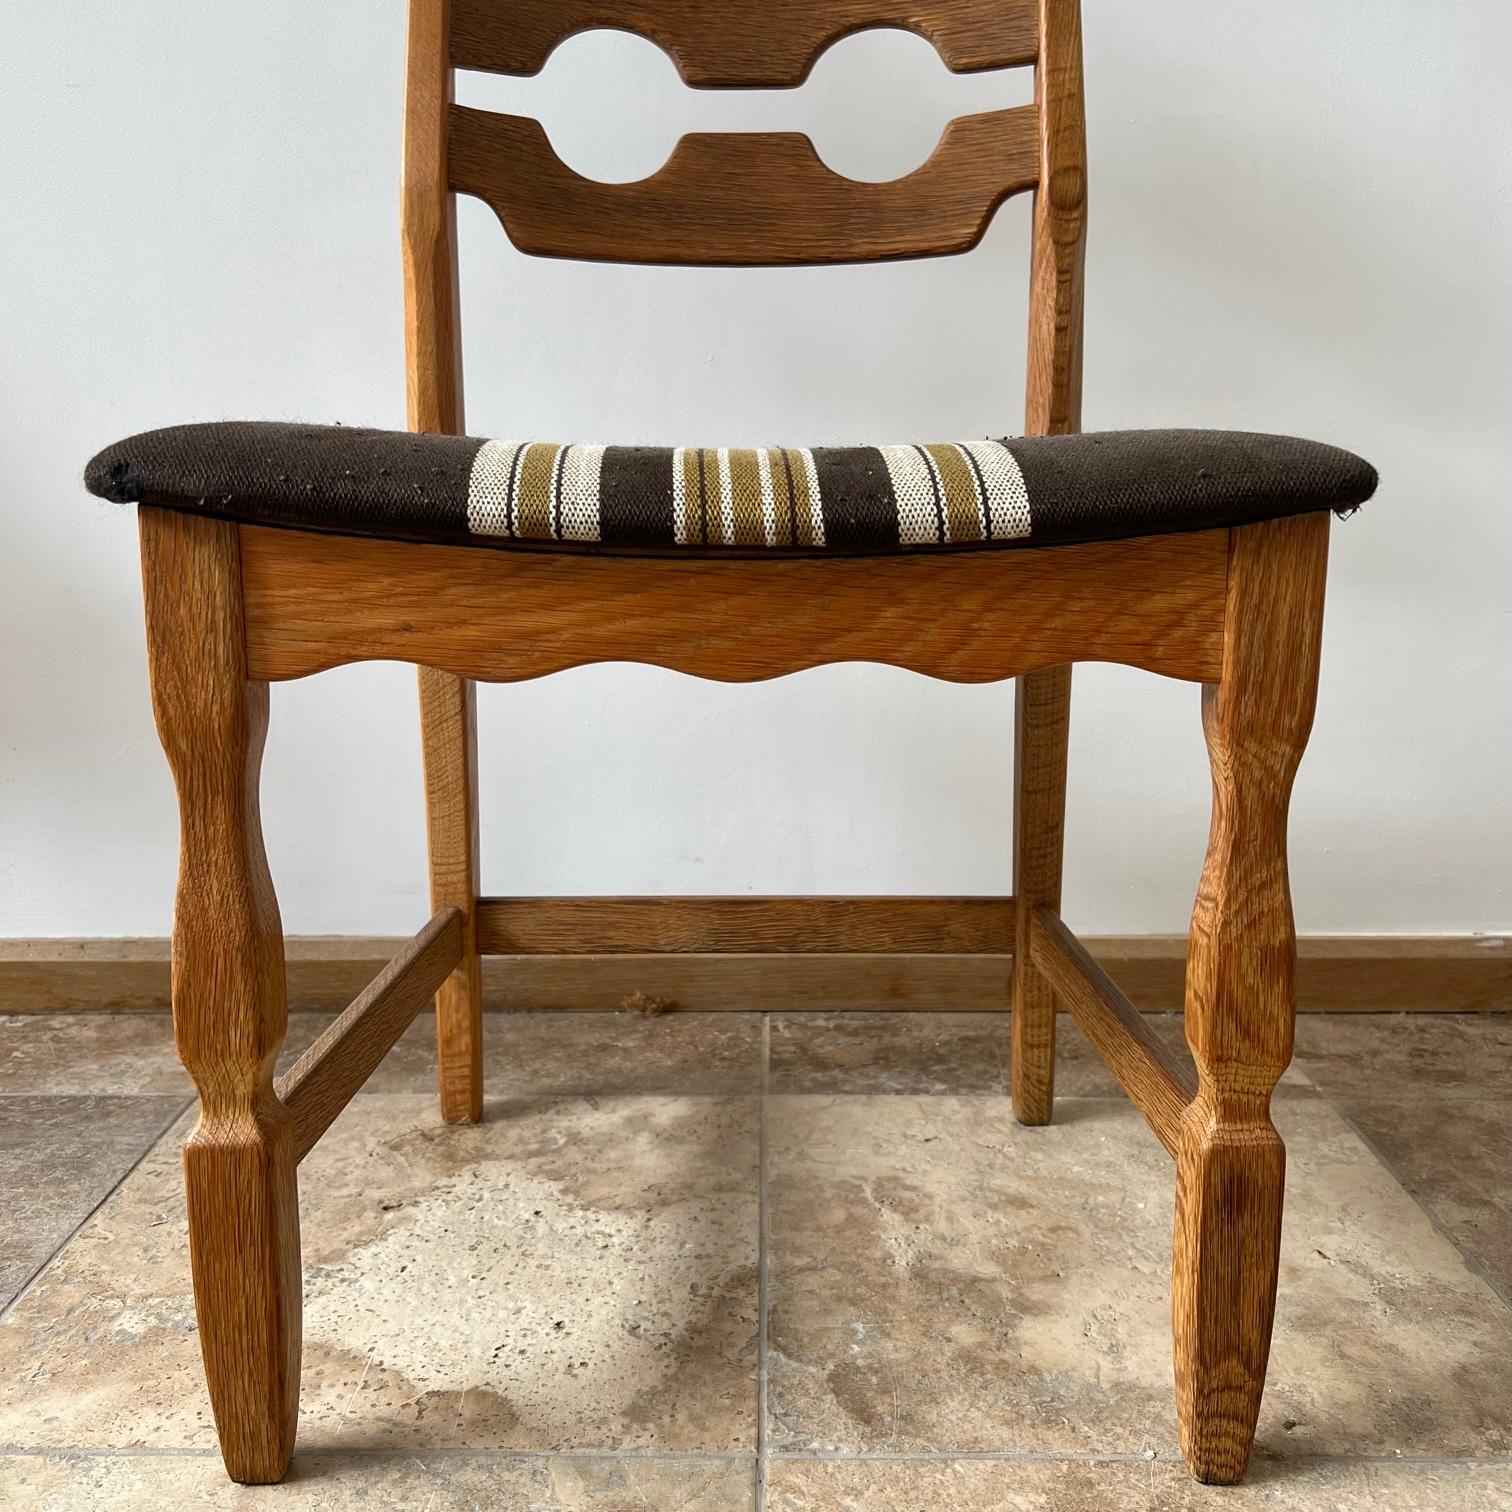 Oak dining chairs by Henning Kjaernulf.

We source many of these chairs for clients so it is best to get in contact with what volume you are looking for and we can propose what we have in stock or coming in to stock. Most sets get pre-sold so we